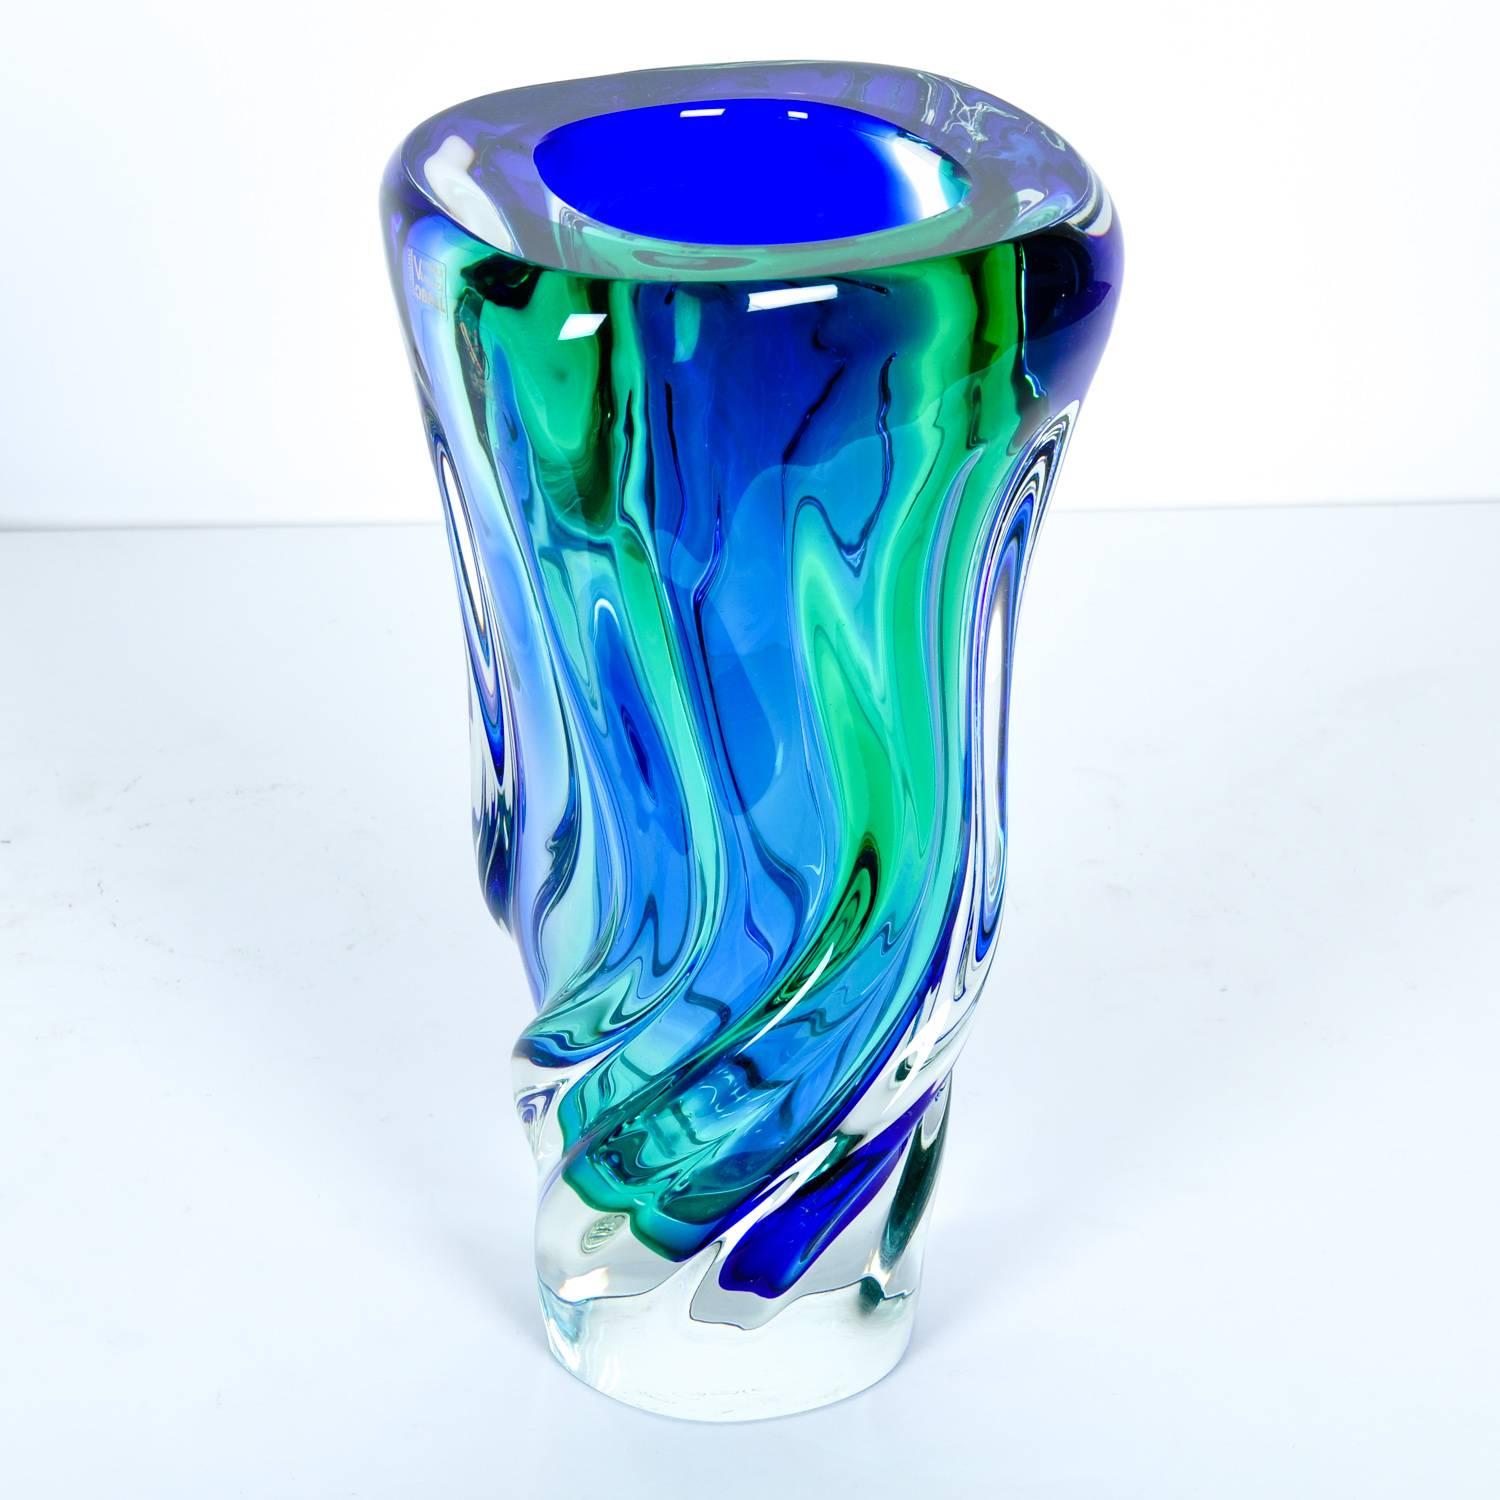 Tall Mid-Century Modern Murano glass decorative piece / vase. This piece measure 12.5 inches high x 7 inches diameter.